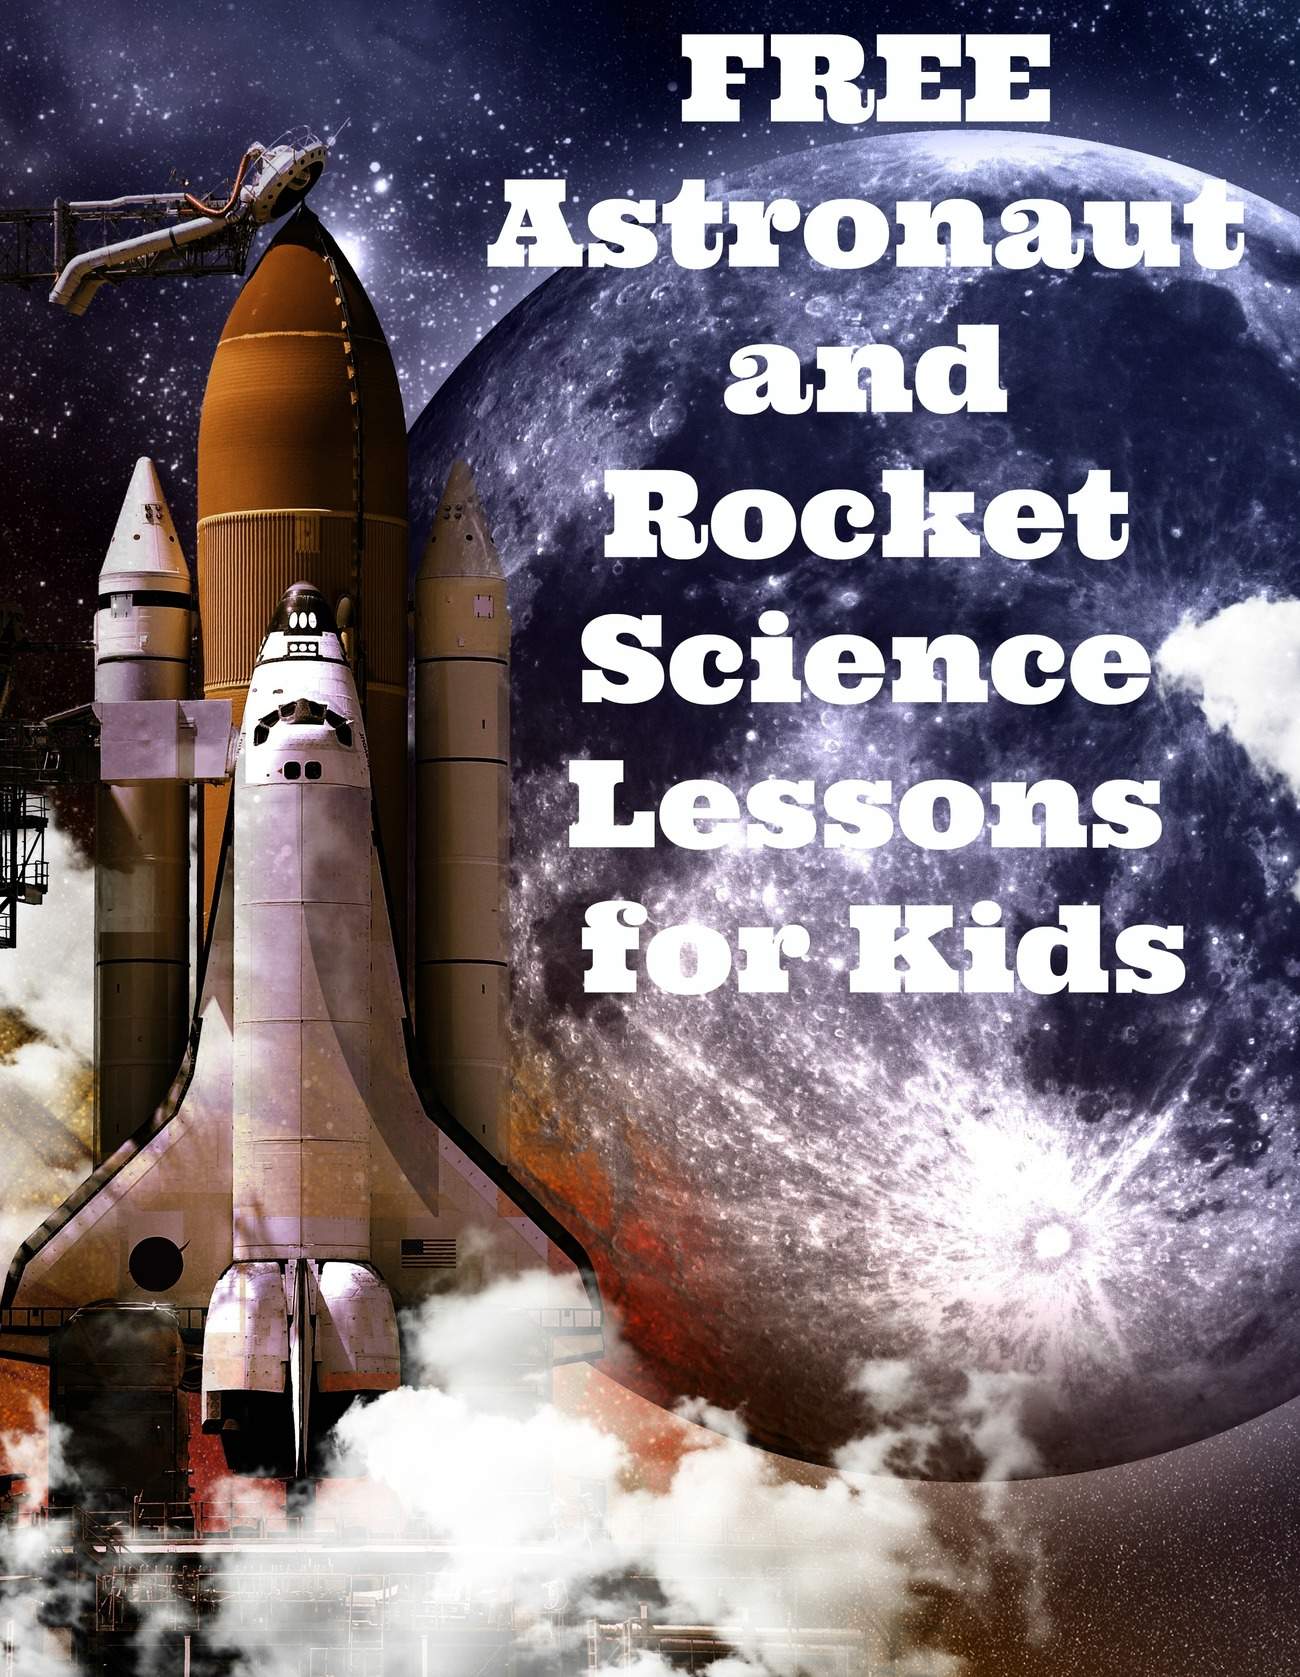 Free Astronaut and Rocket Ship Lessons